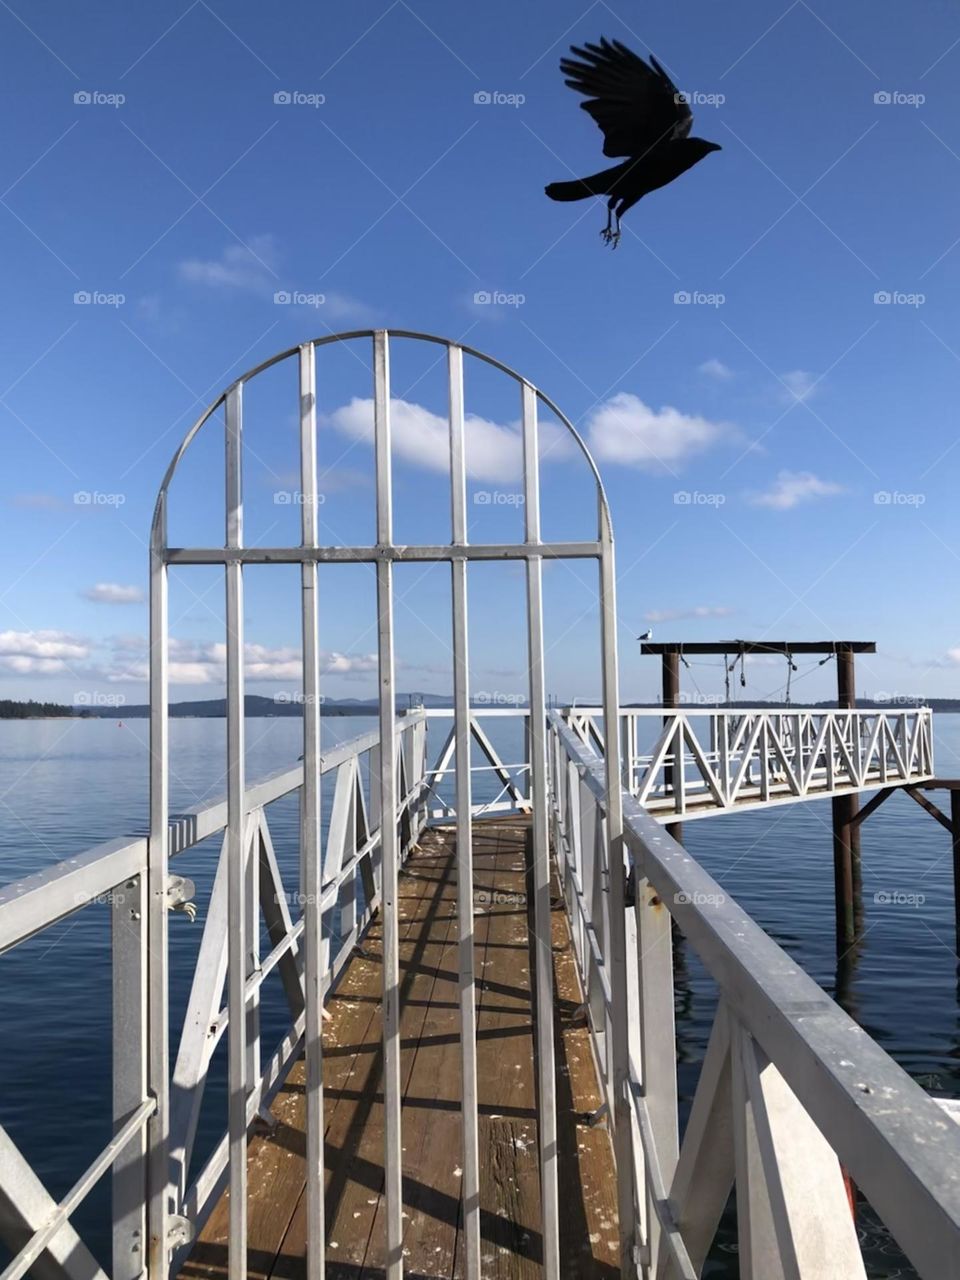 Crow Takes of Sidney Harbour Pier 